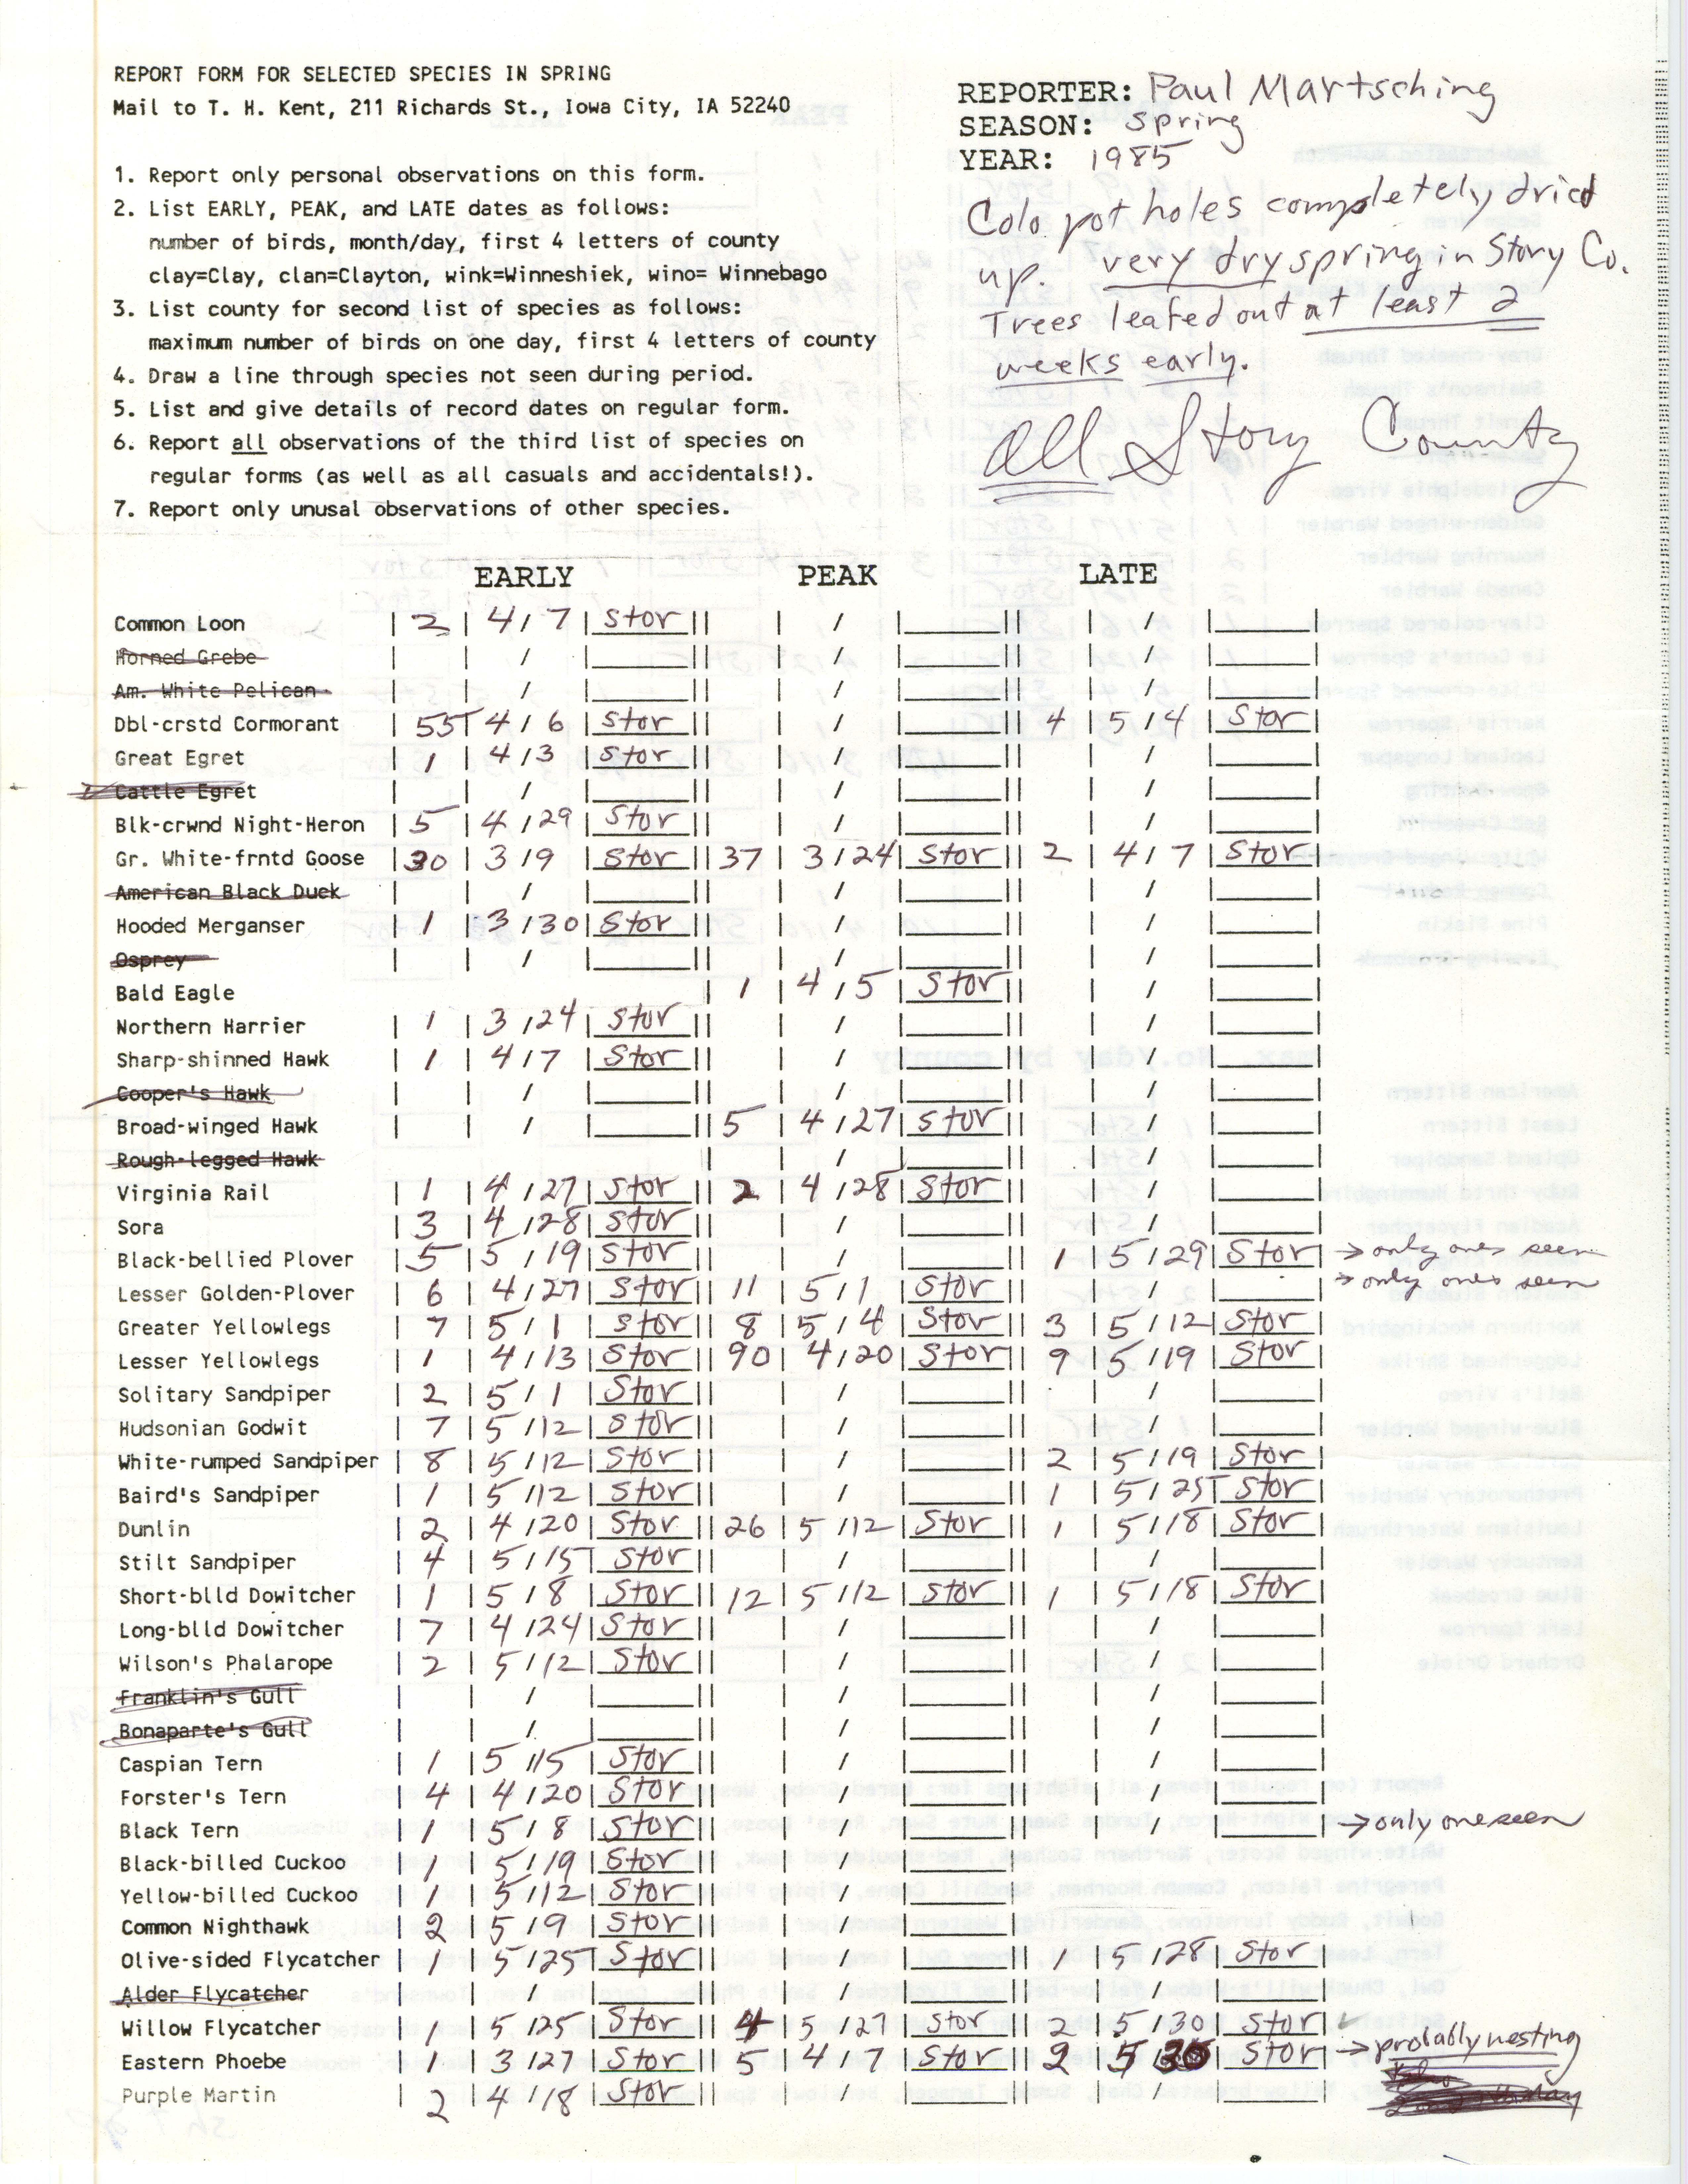 Report form for selected species in spring, contributed by Paul Martsching, spring 1985